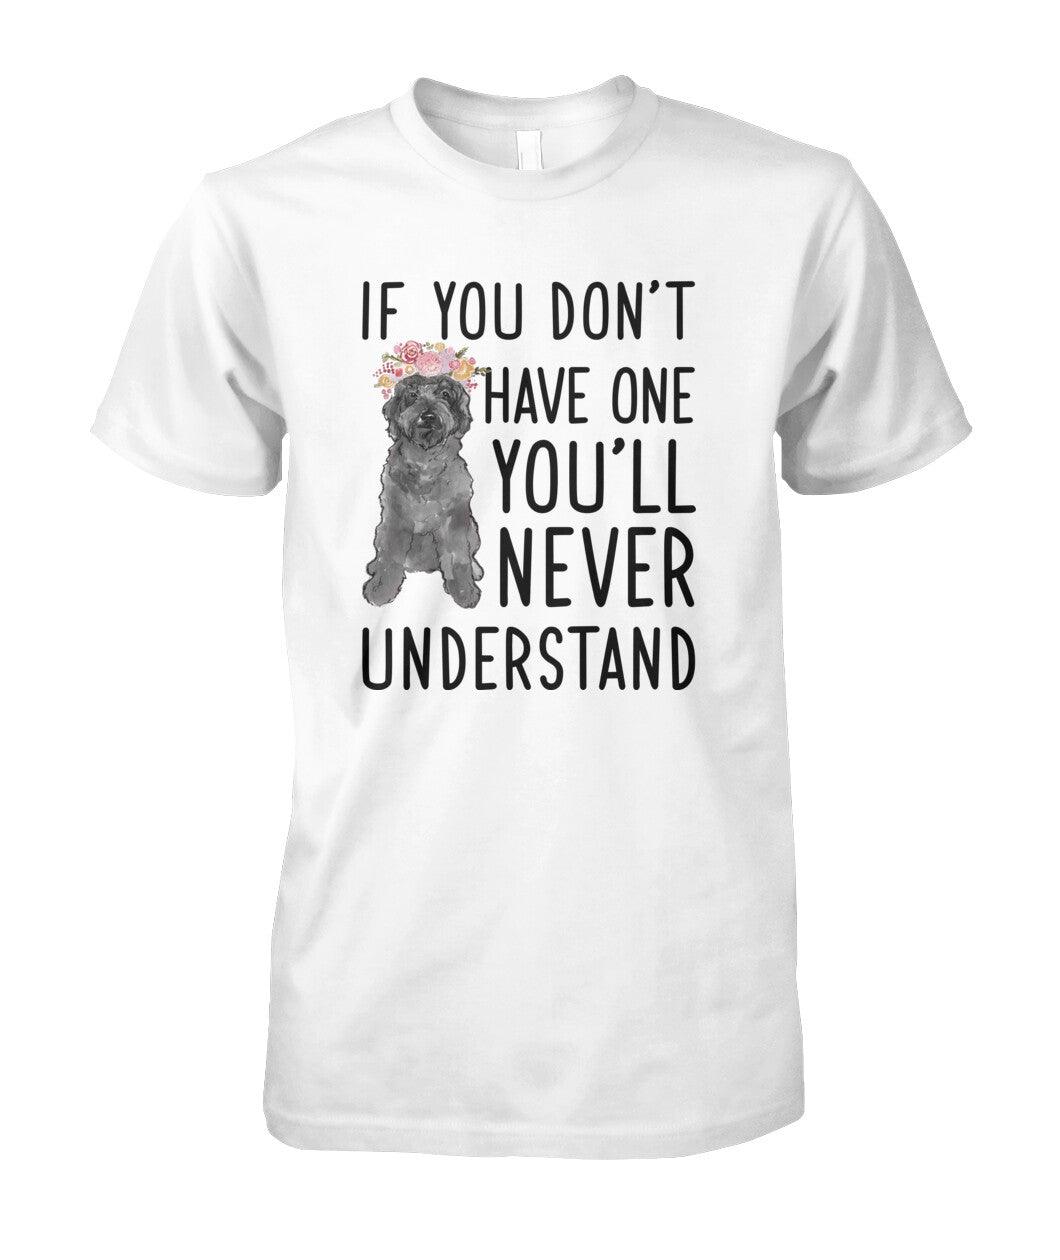 Labradoodle Unisex T Shirt - Labradoodle If You Don't Have One You'll Never Understand Unisex T Shirt - Gift For Dog Lovers, Family, Friends - Amzanimalsgift